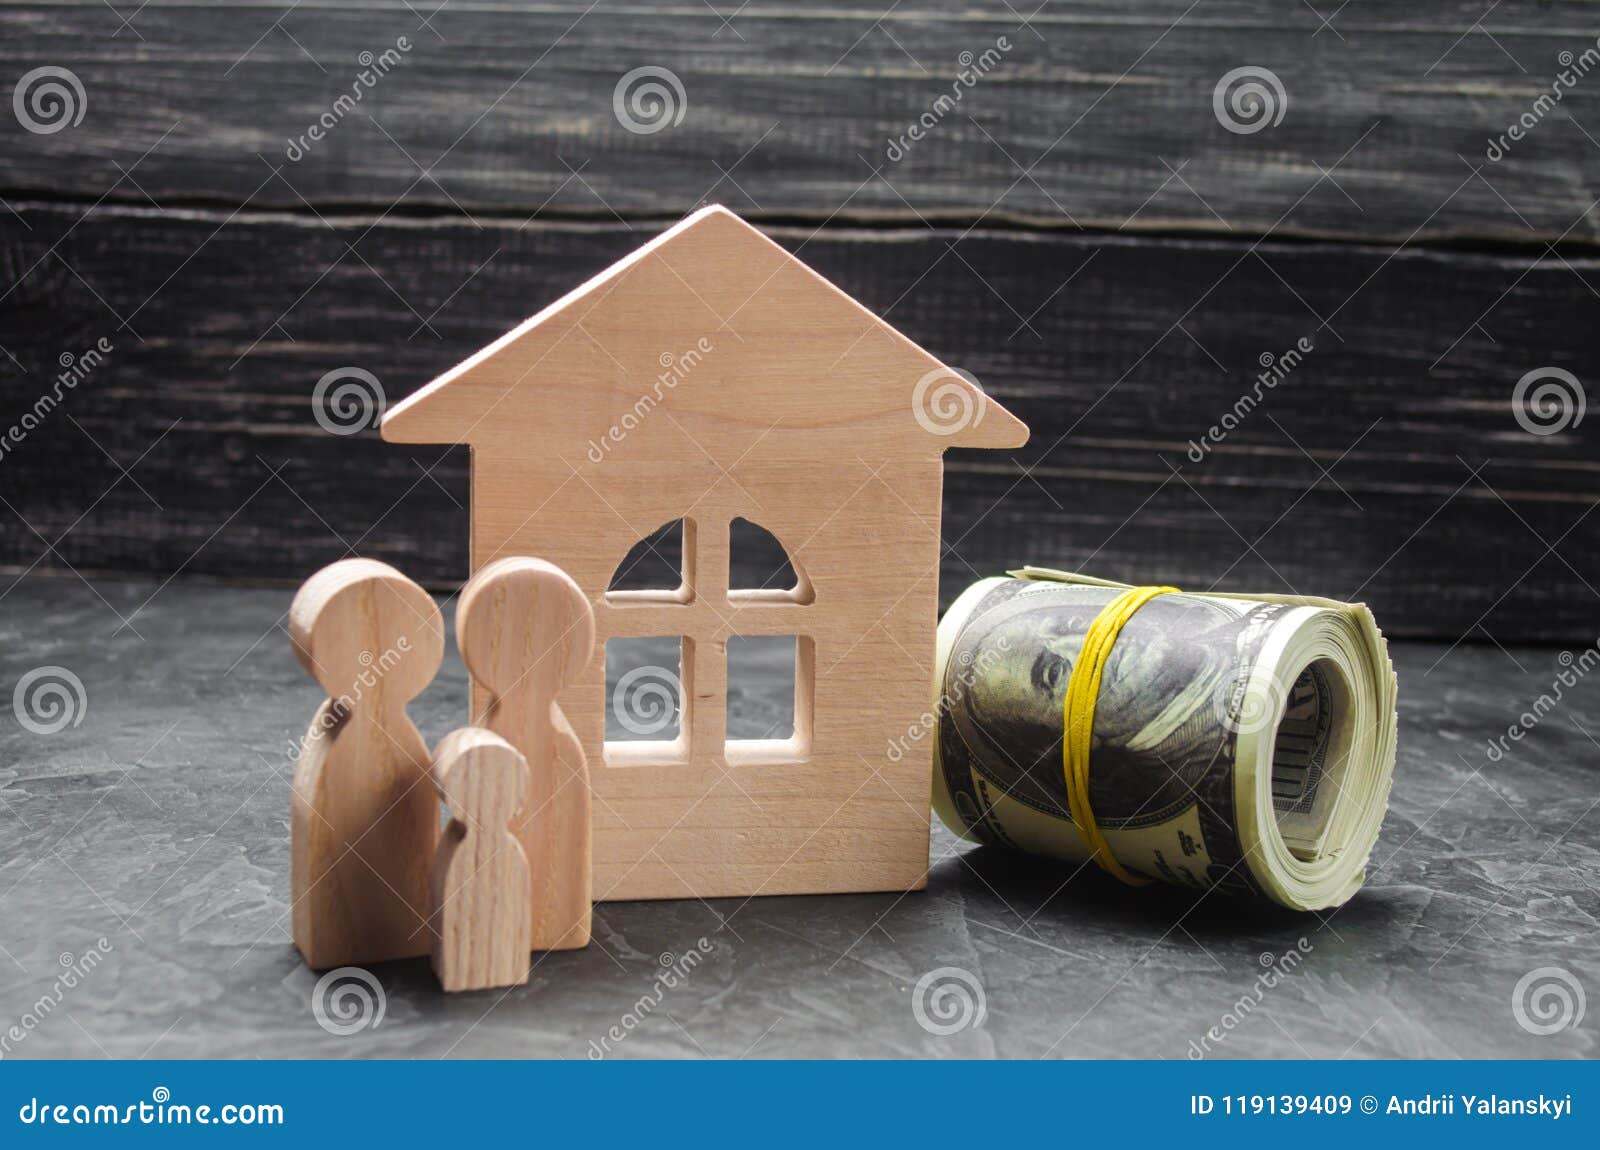 wooden figures of the family stand near a wooden house and collapsed money. buying and selling a house. good life, moving